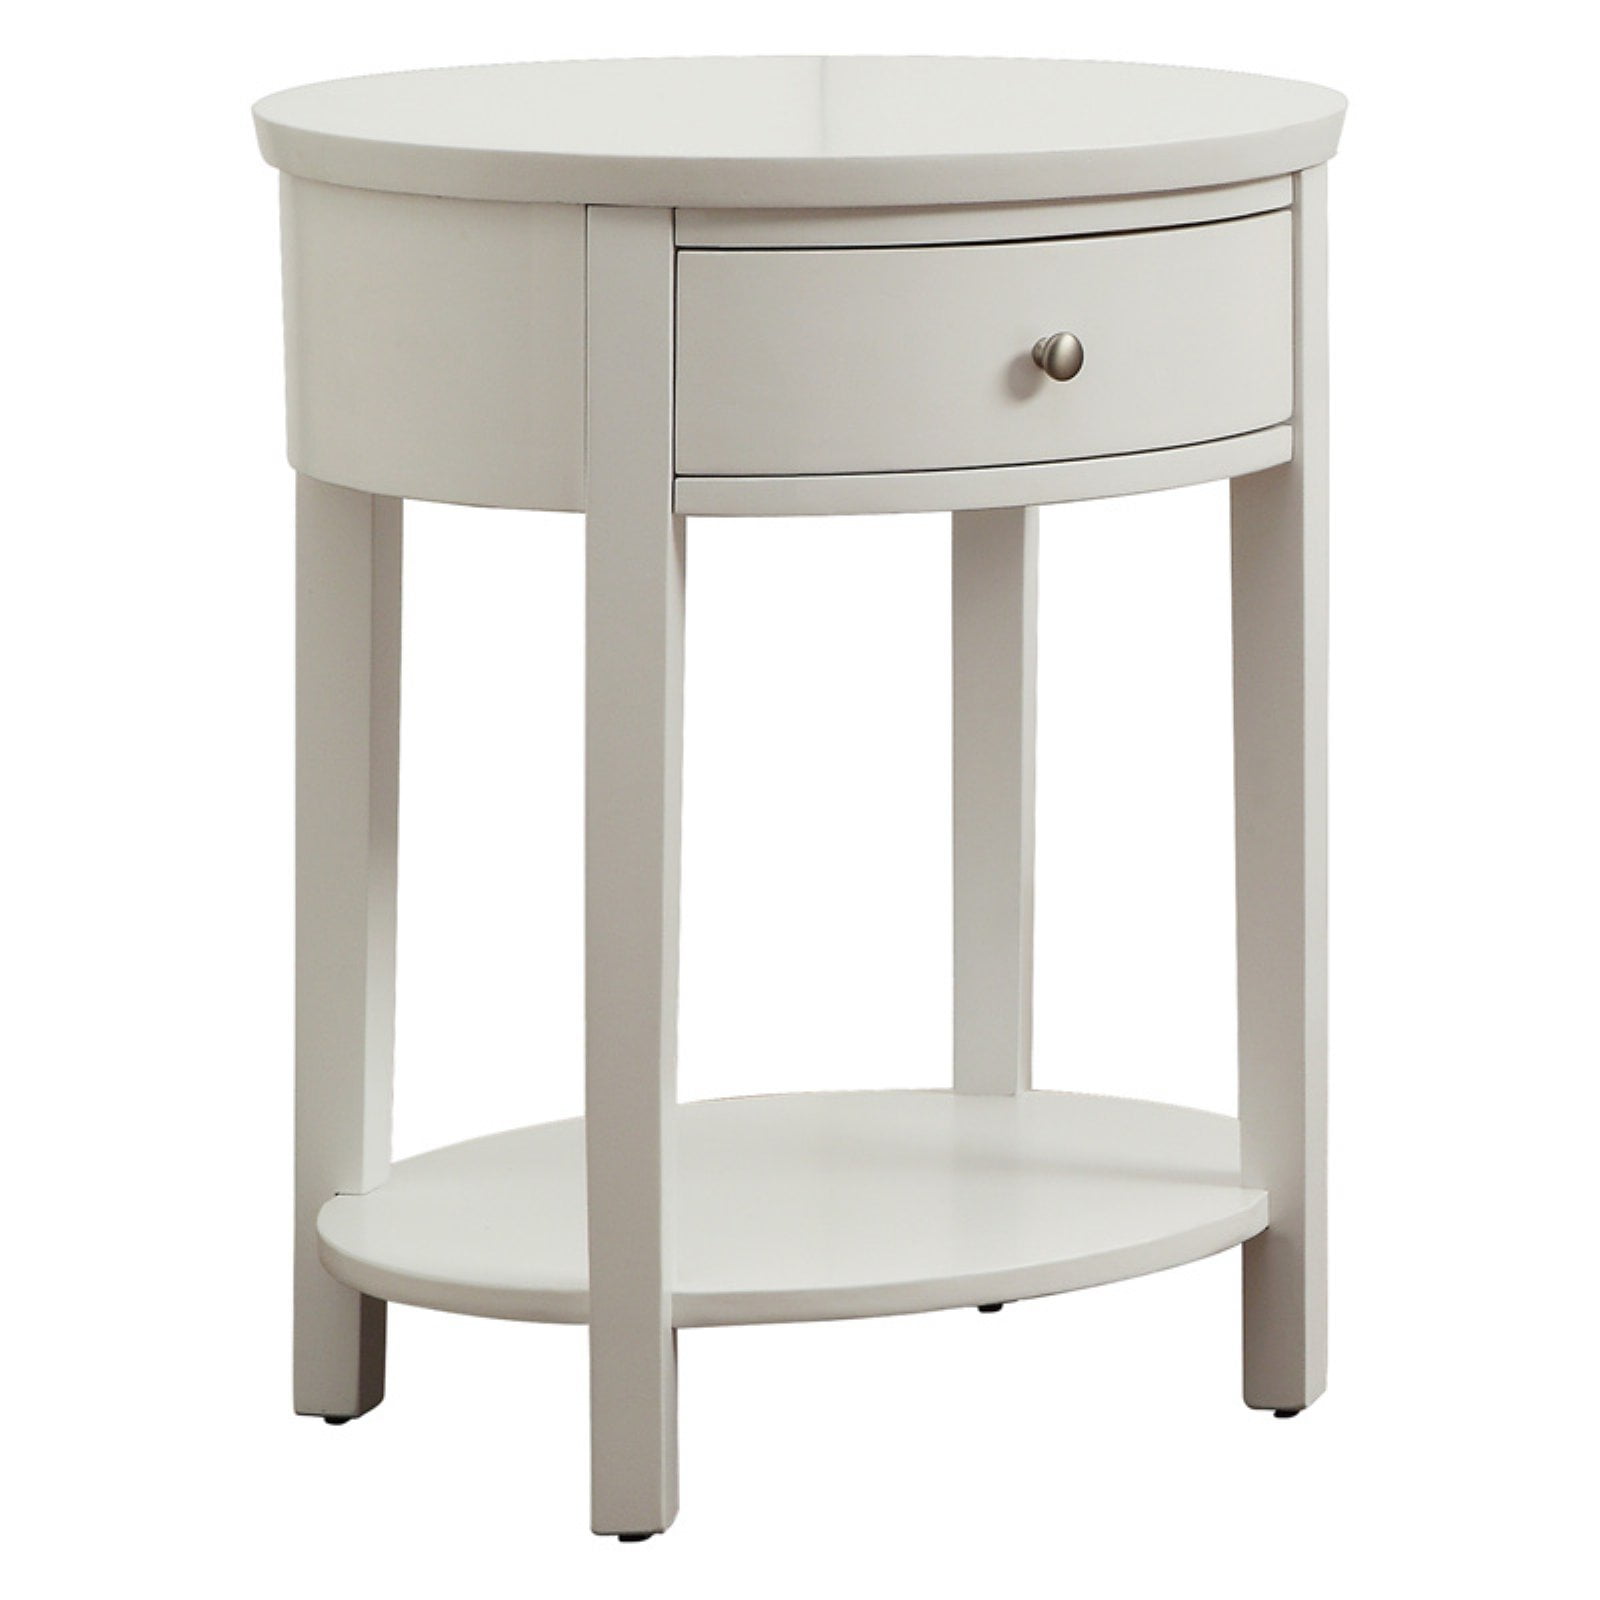 Lucas Living Room Oval Accent End Table With Lower Shelf